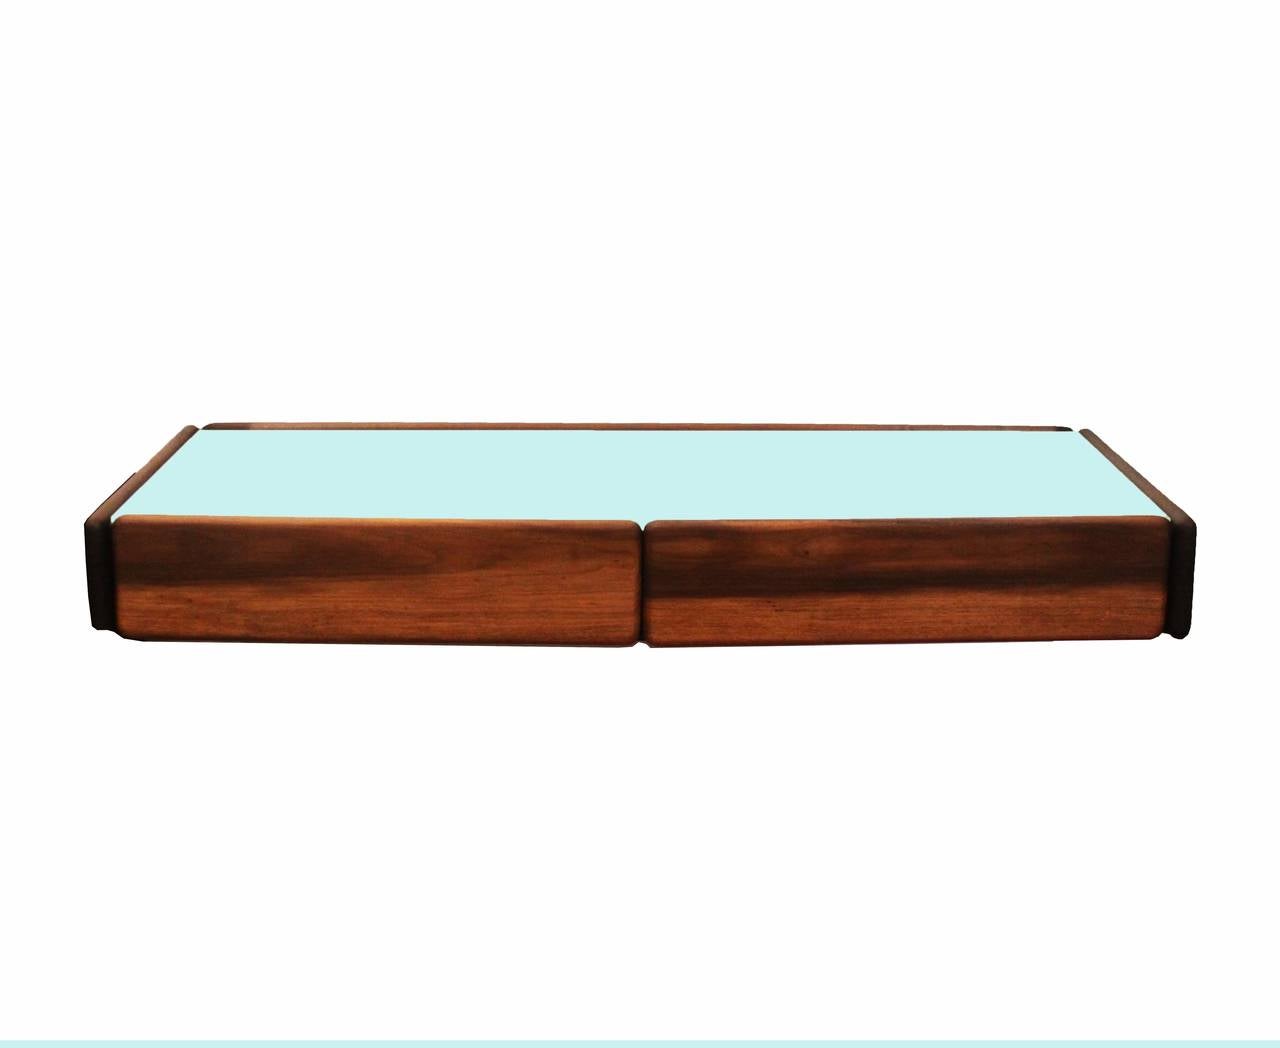 A floating shelf in Brazilian hardwood with two drawers and inset reverse painted white glass that appears almost light green through the glass, designed by Celina Moveis. The wood has been refinished with a clear oil finish that brings out the